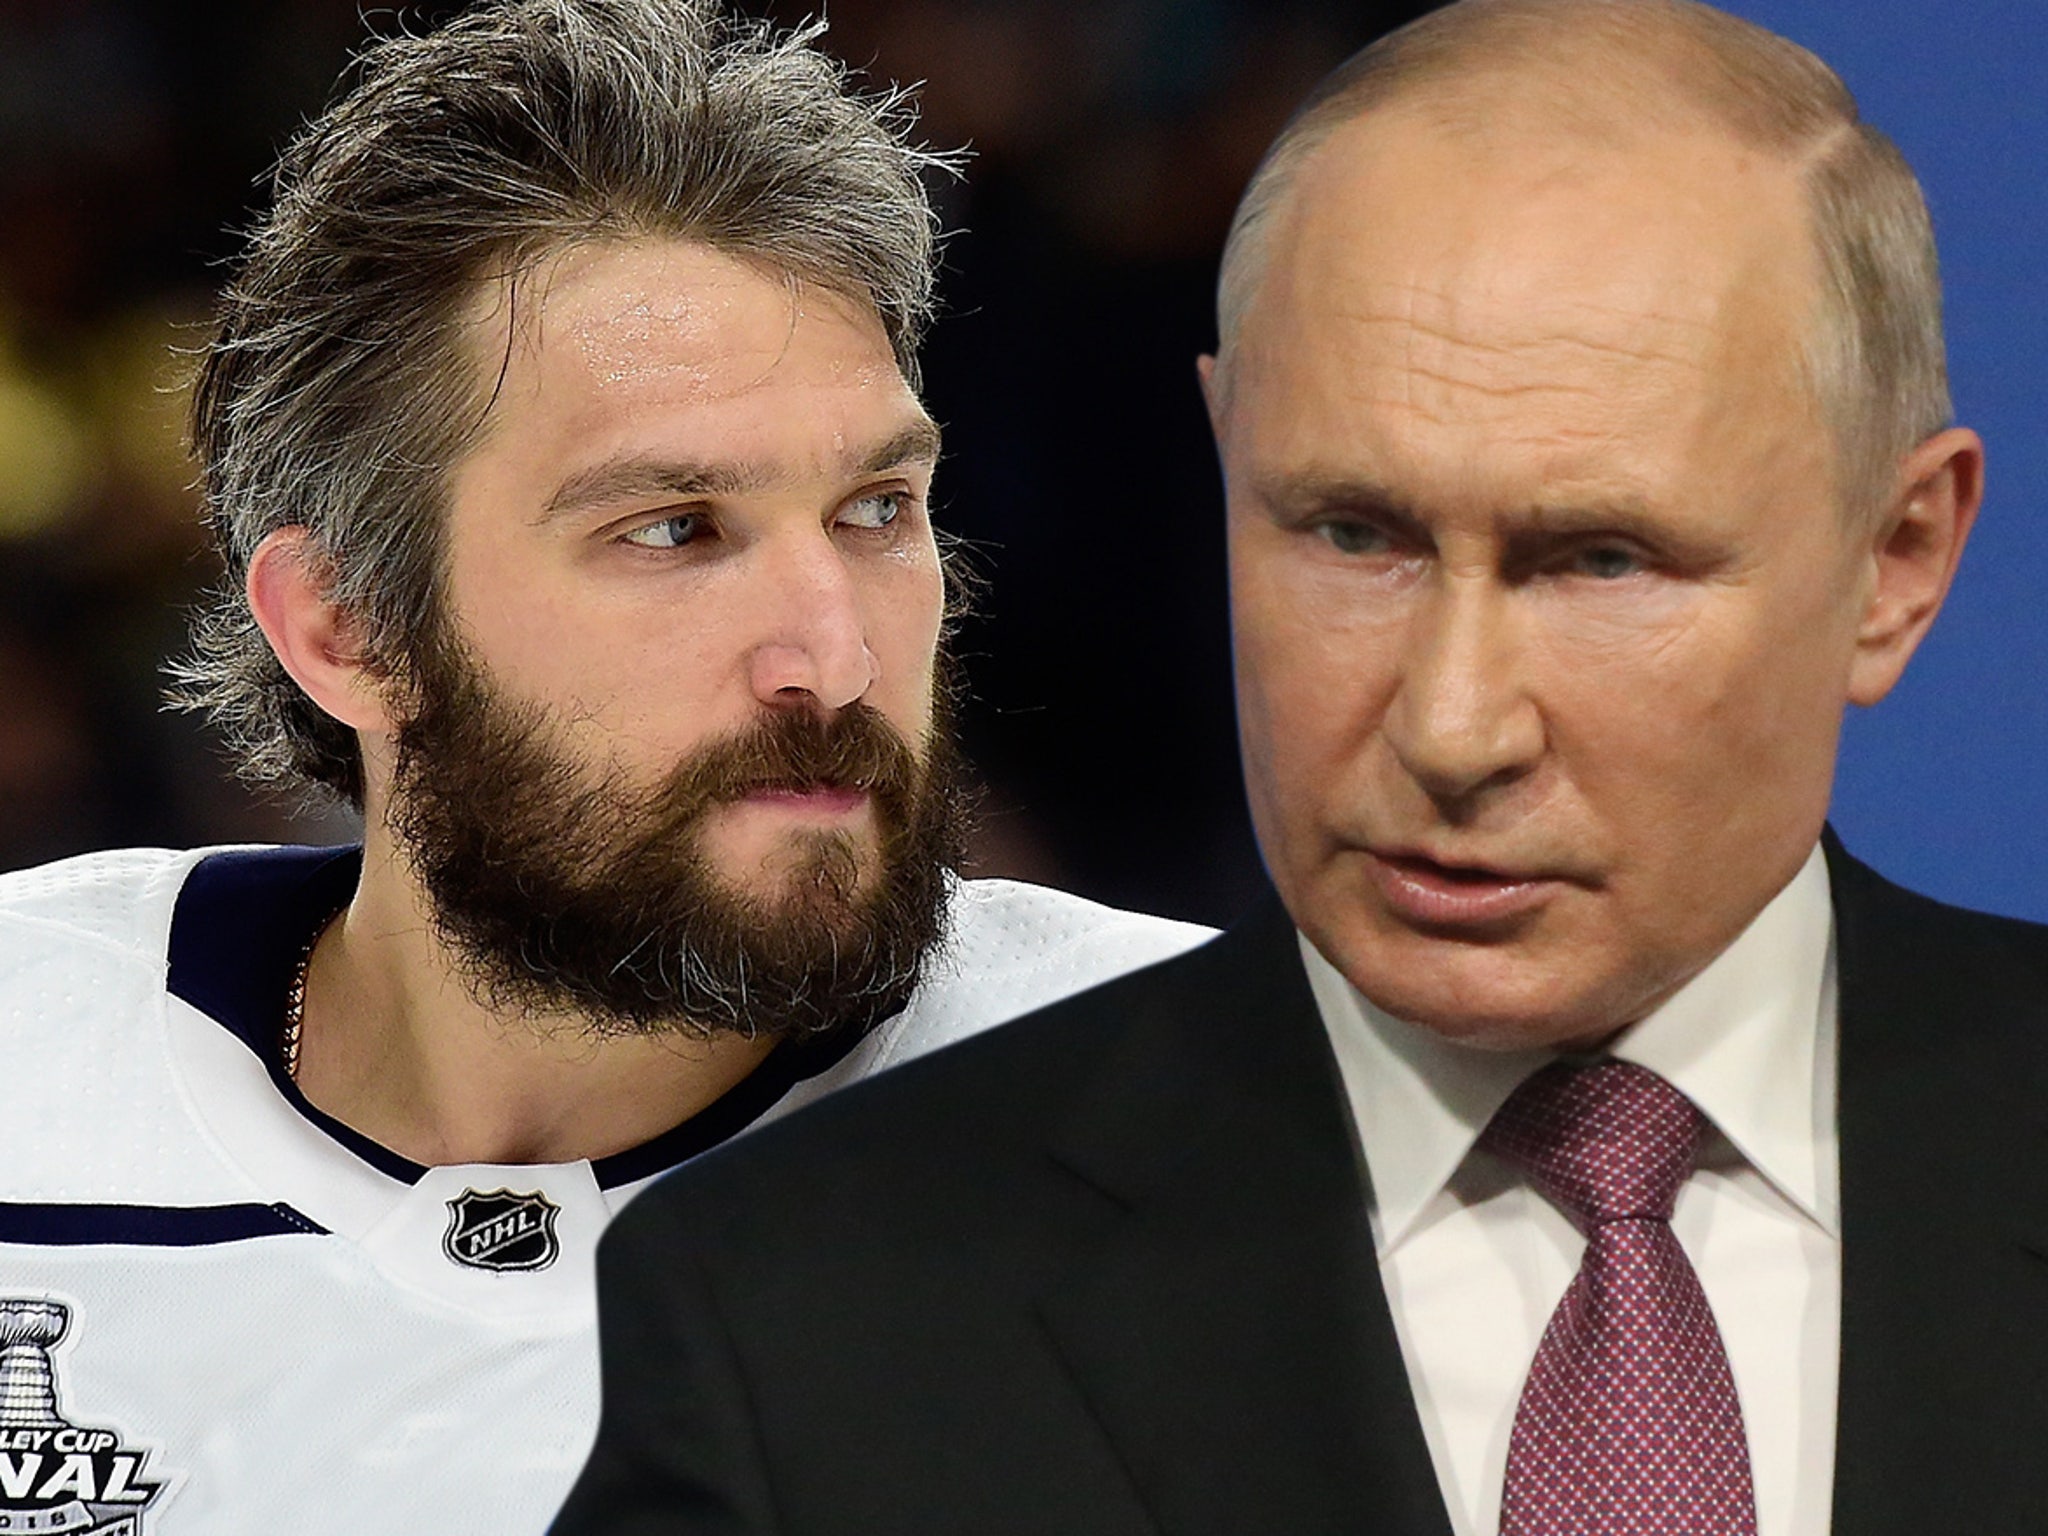 What You Should Know About Alex Ovechkin and Vladimir Putin's